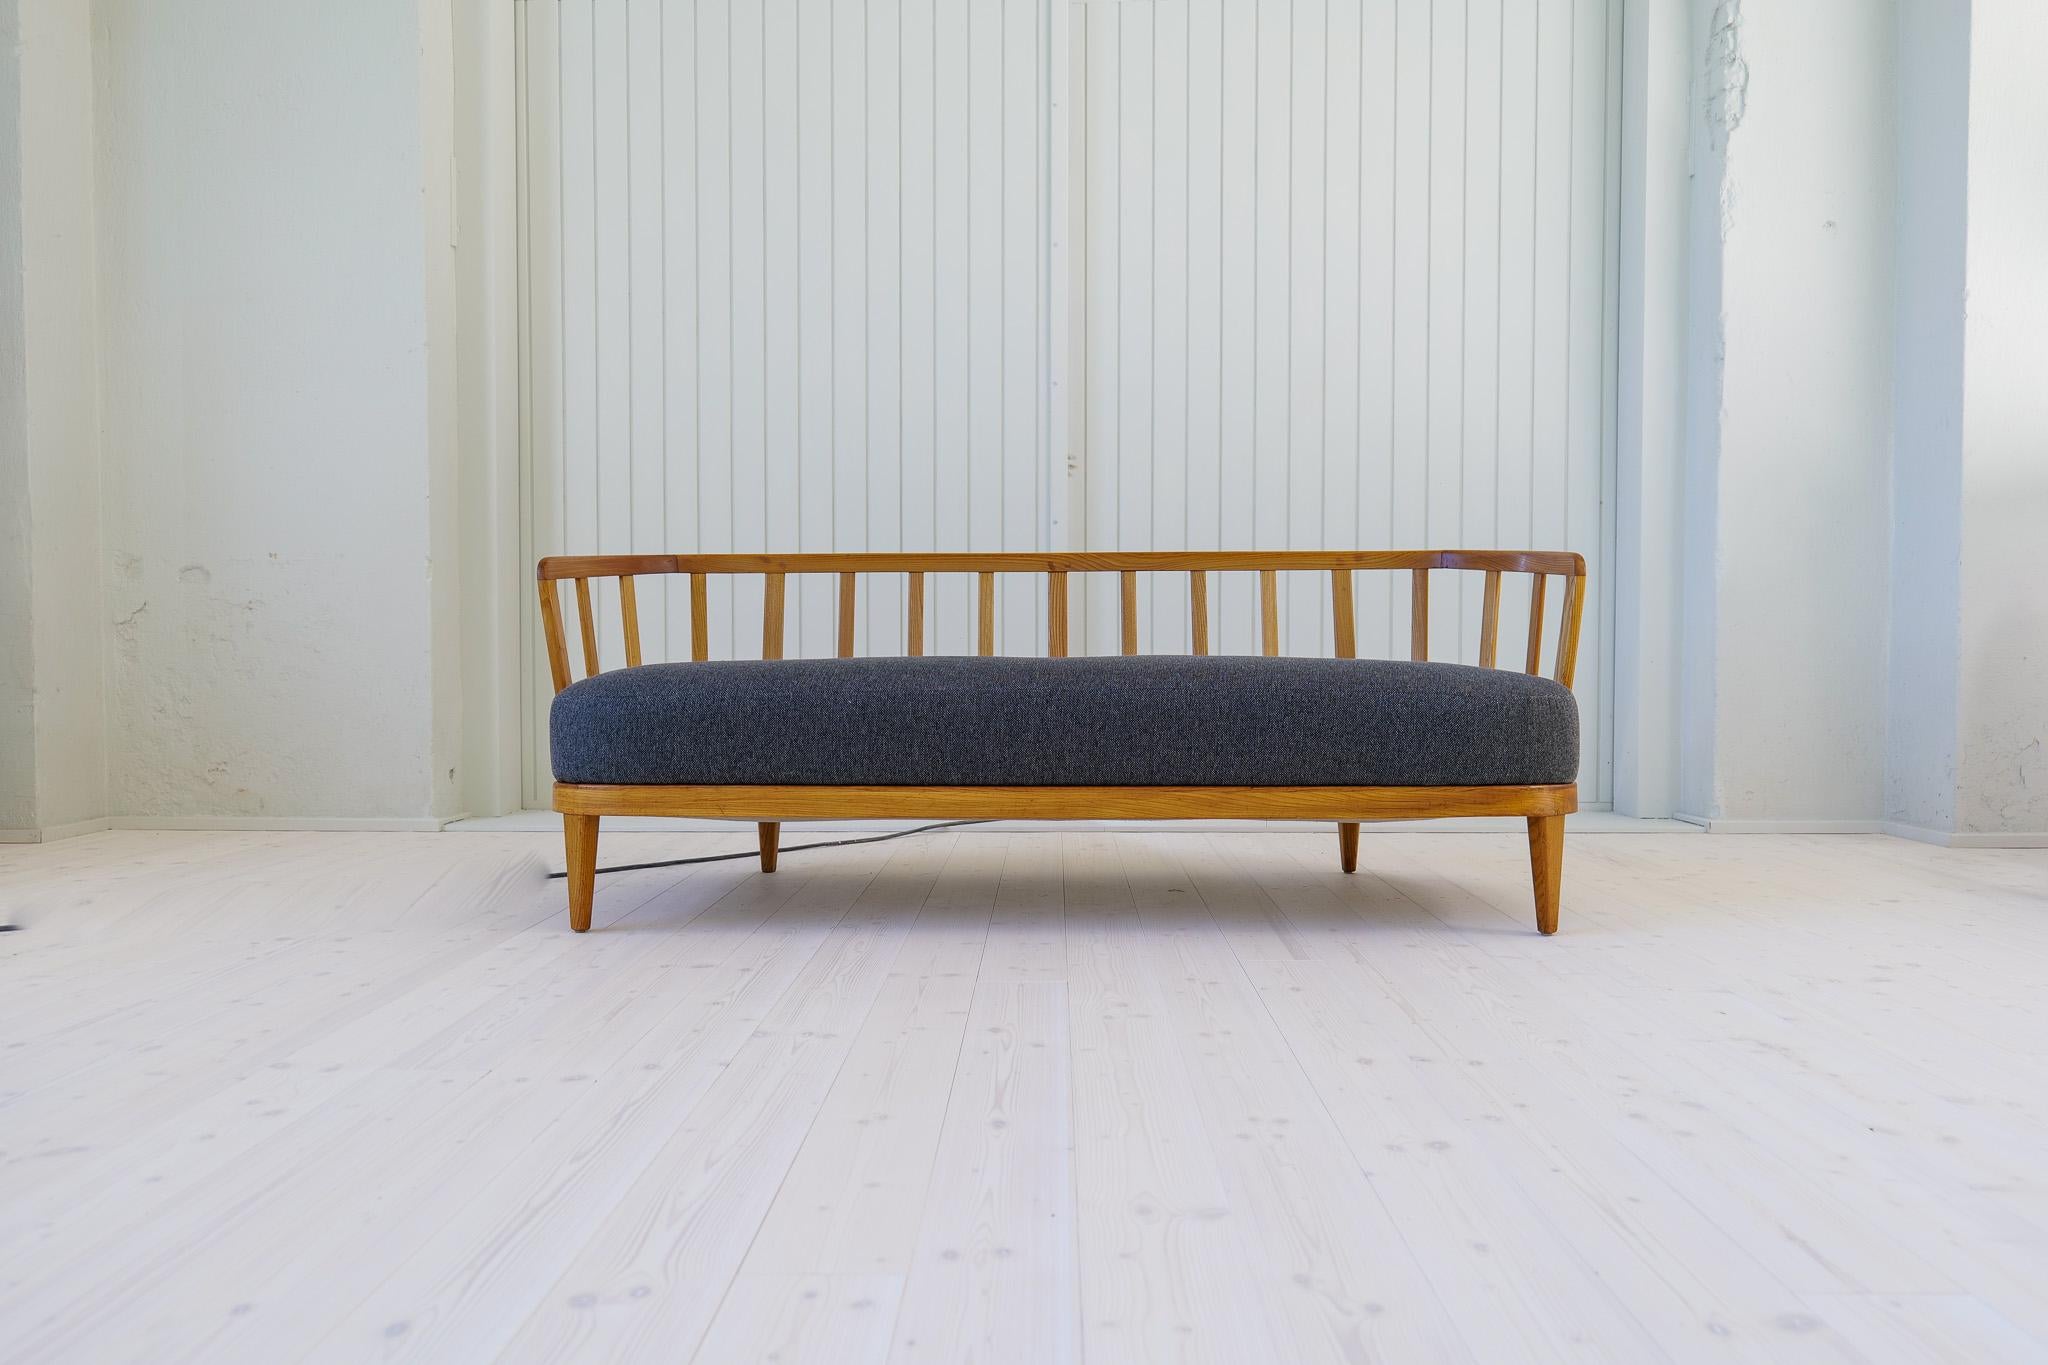 This Rare model” Värend” sofa was designed by Carl Malmsten in the 1940s. The sofa has been reupholstered. Stained elm, back with ribs, loose back cushions and upholstered seat, covered in grey fabric. We choose to show the sofa mostly with the back